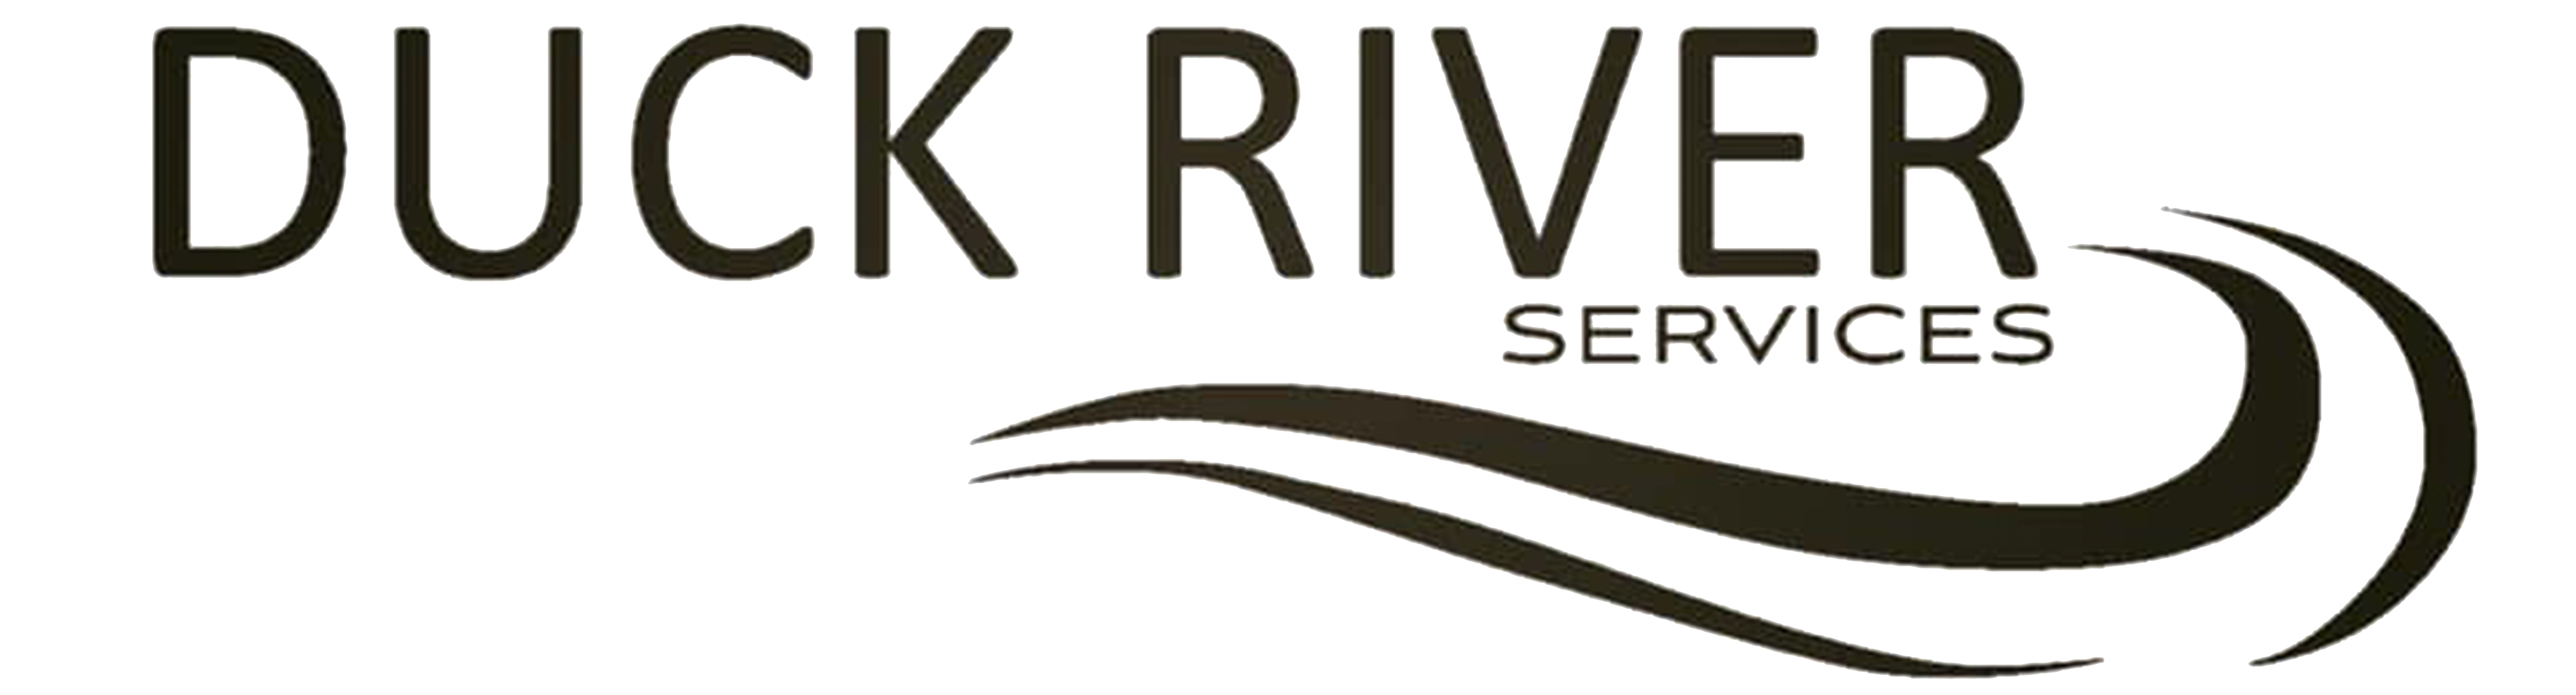 Duck River Services